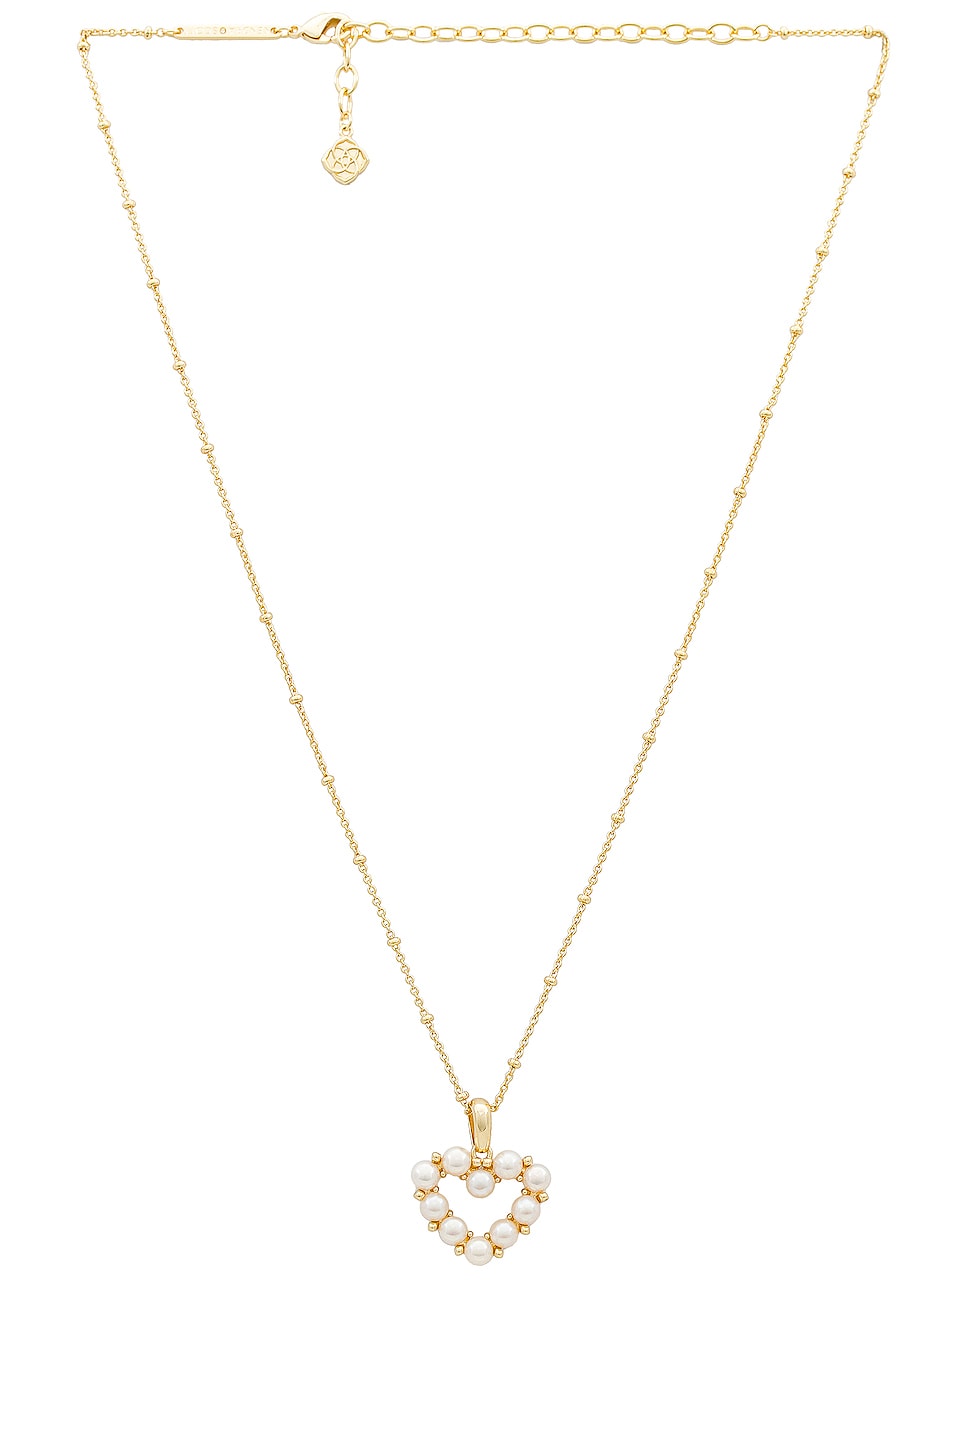 Kendra Scott Heart Gold Pendant Necklace in Iridescent Drusy | The Paper  Store